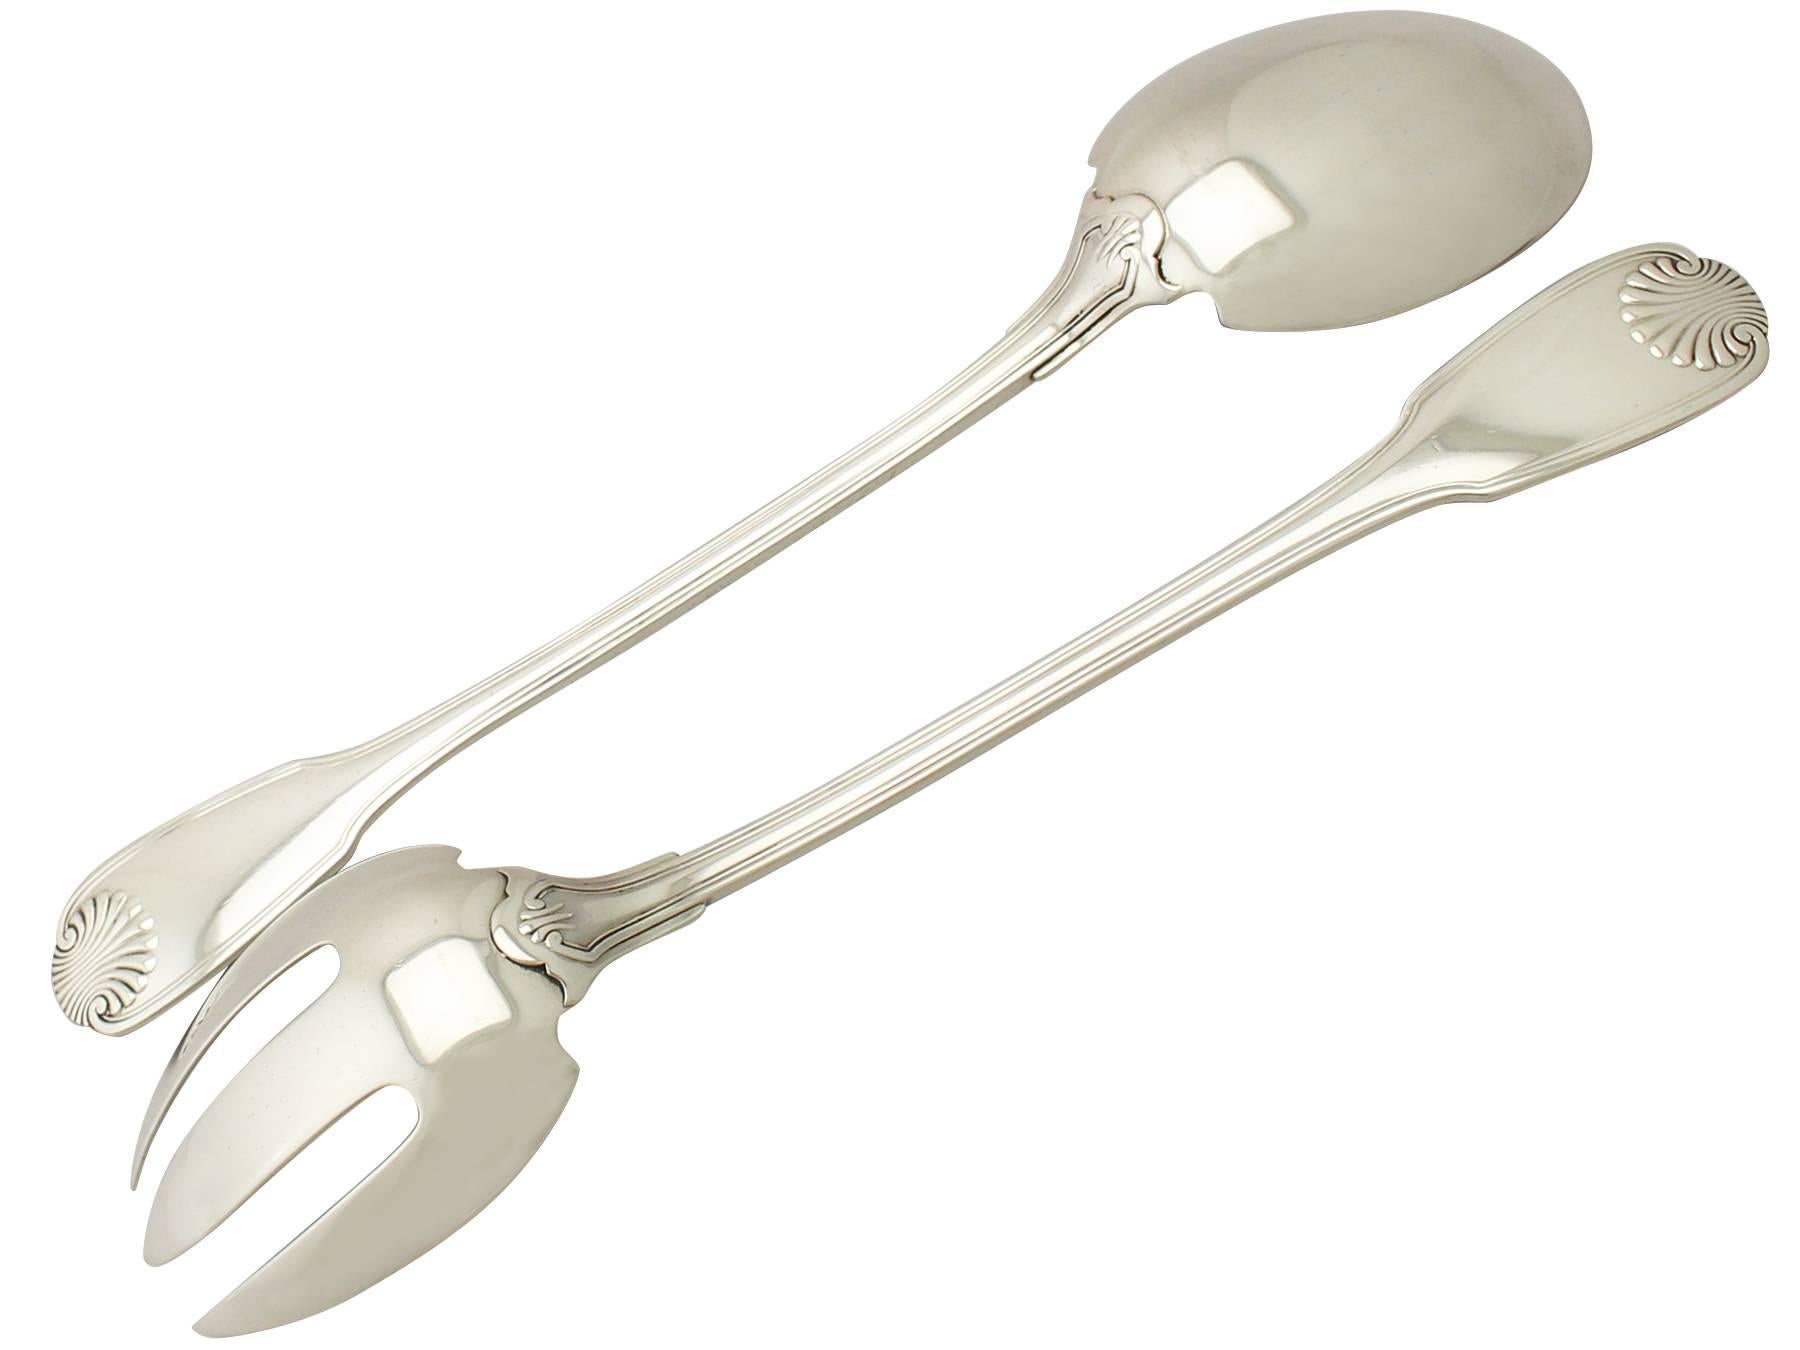 A fine and impressive pair of vintage French silver Fiddle thread and shell pattern salad spoons; an addition to our silver flatware collection.

These fine vintage French silver salad servers have been crafted in the fiddle thread and shell